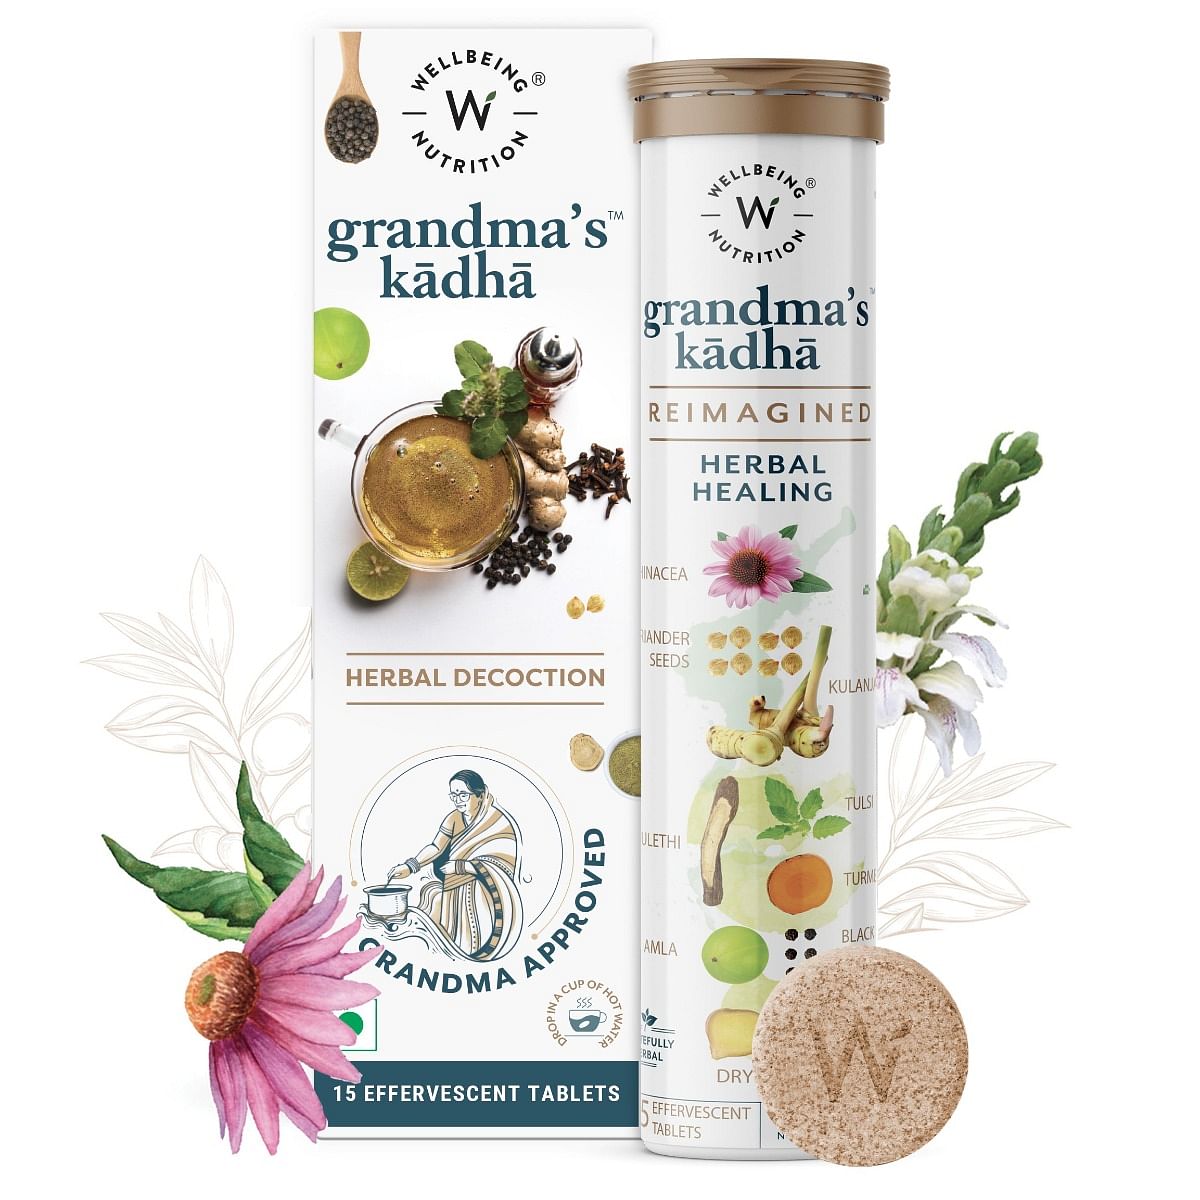 Wellbeing Nutrition Grandma's Kadha - Ayurvedic Immunity Booster for Cold, Cough, Sore Throat, 15 Effervescent Tablets